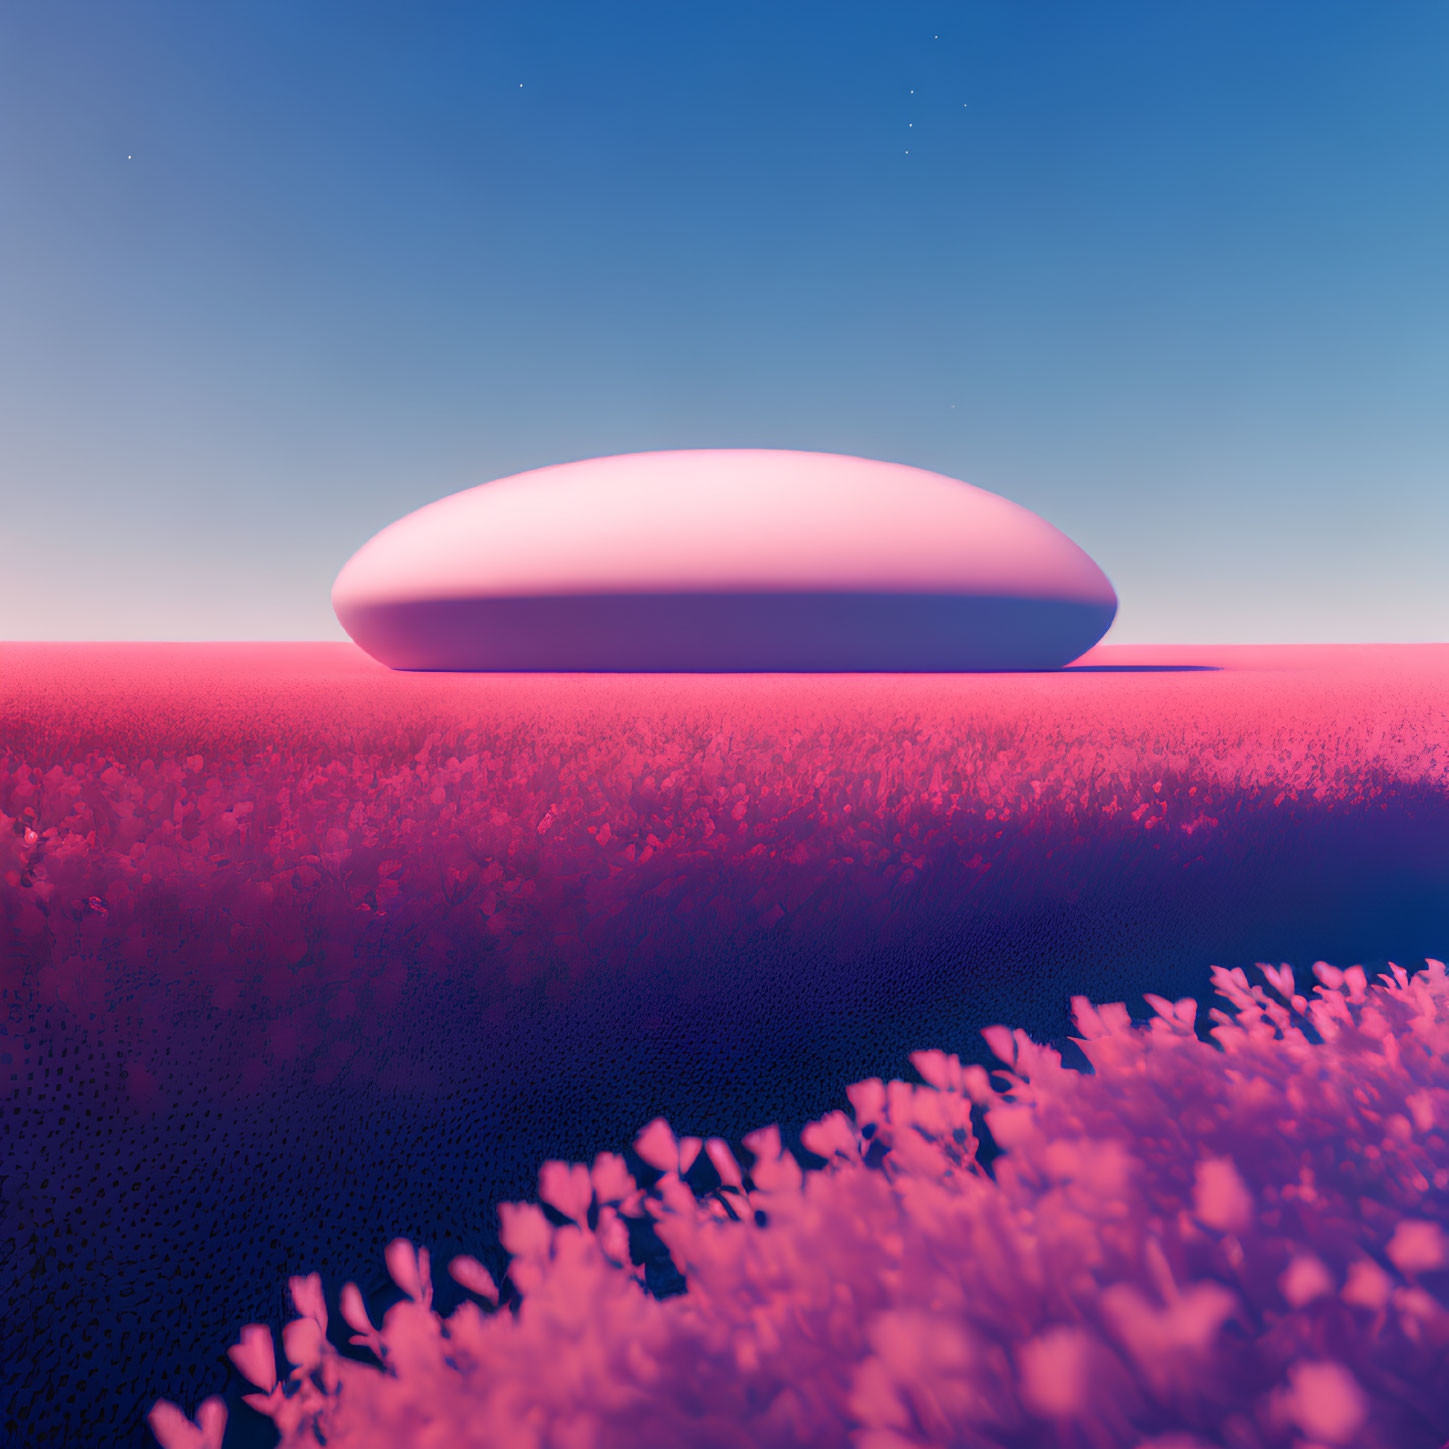 Surreal landscape with pink foliage and hovering white object